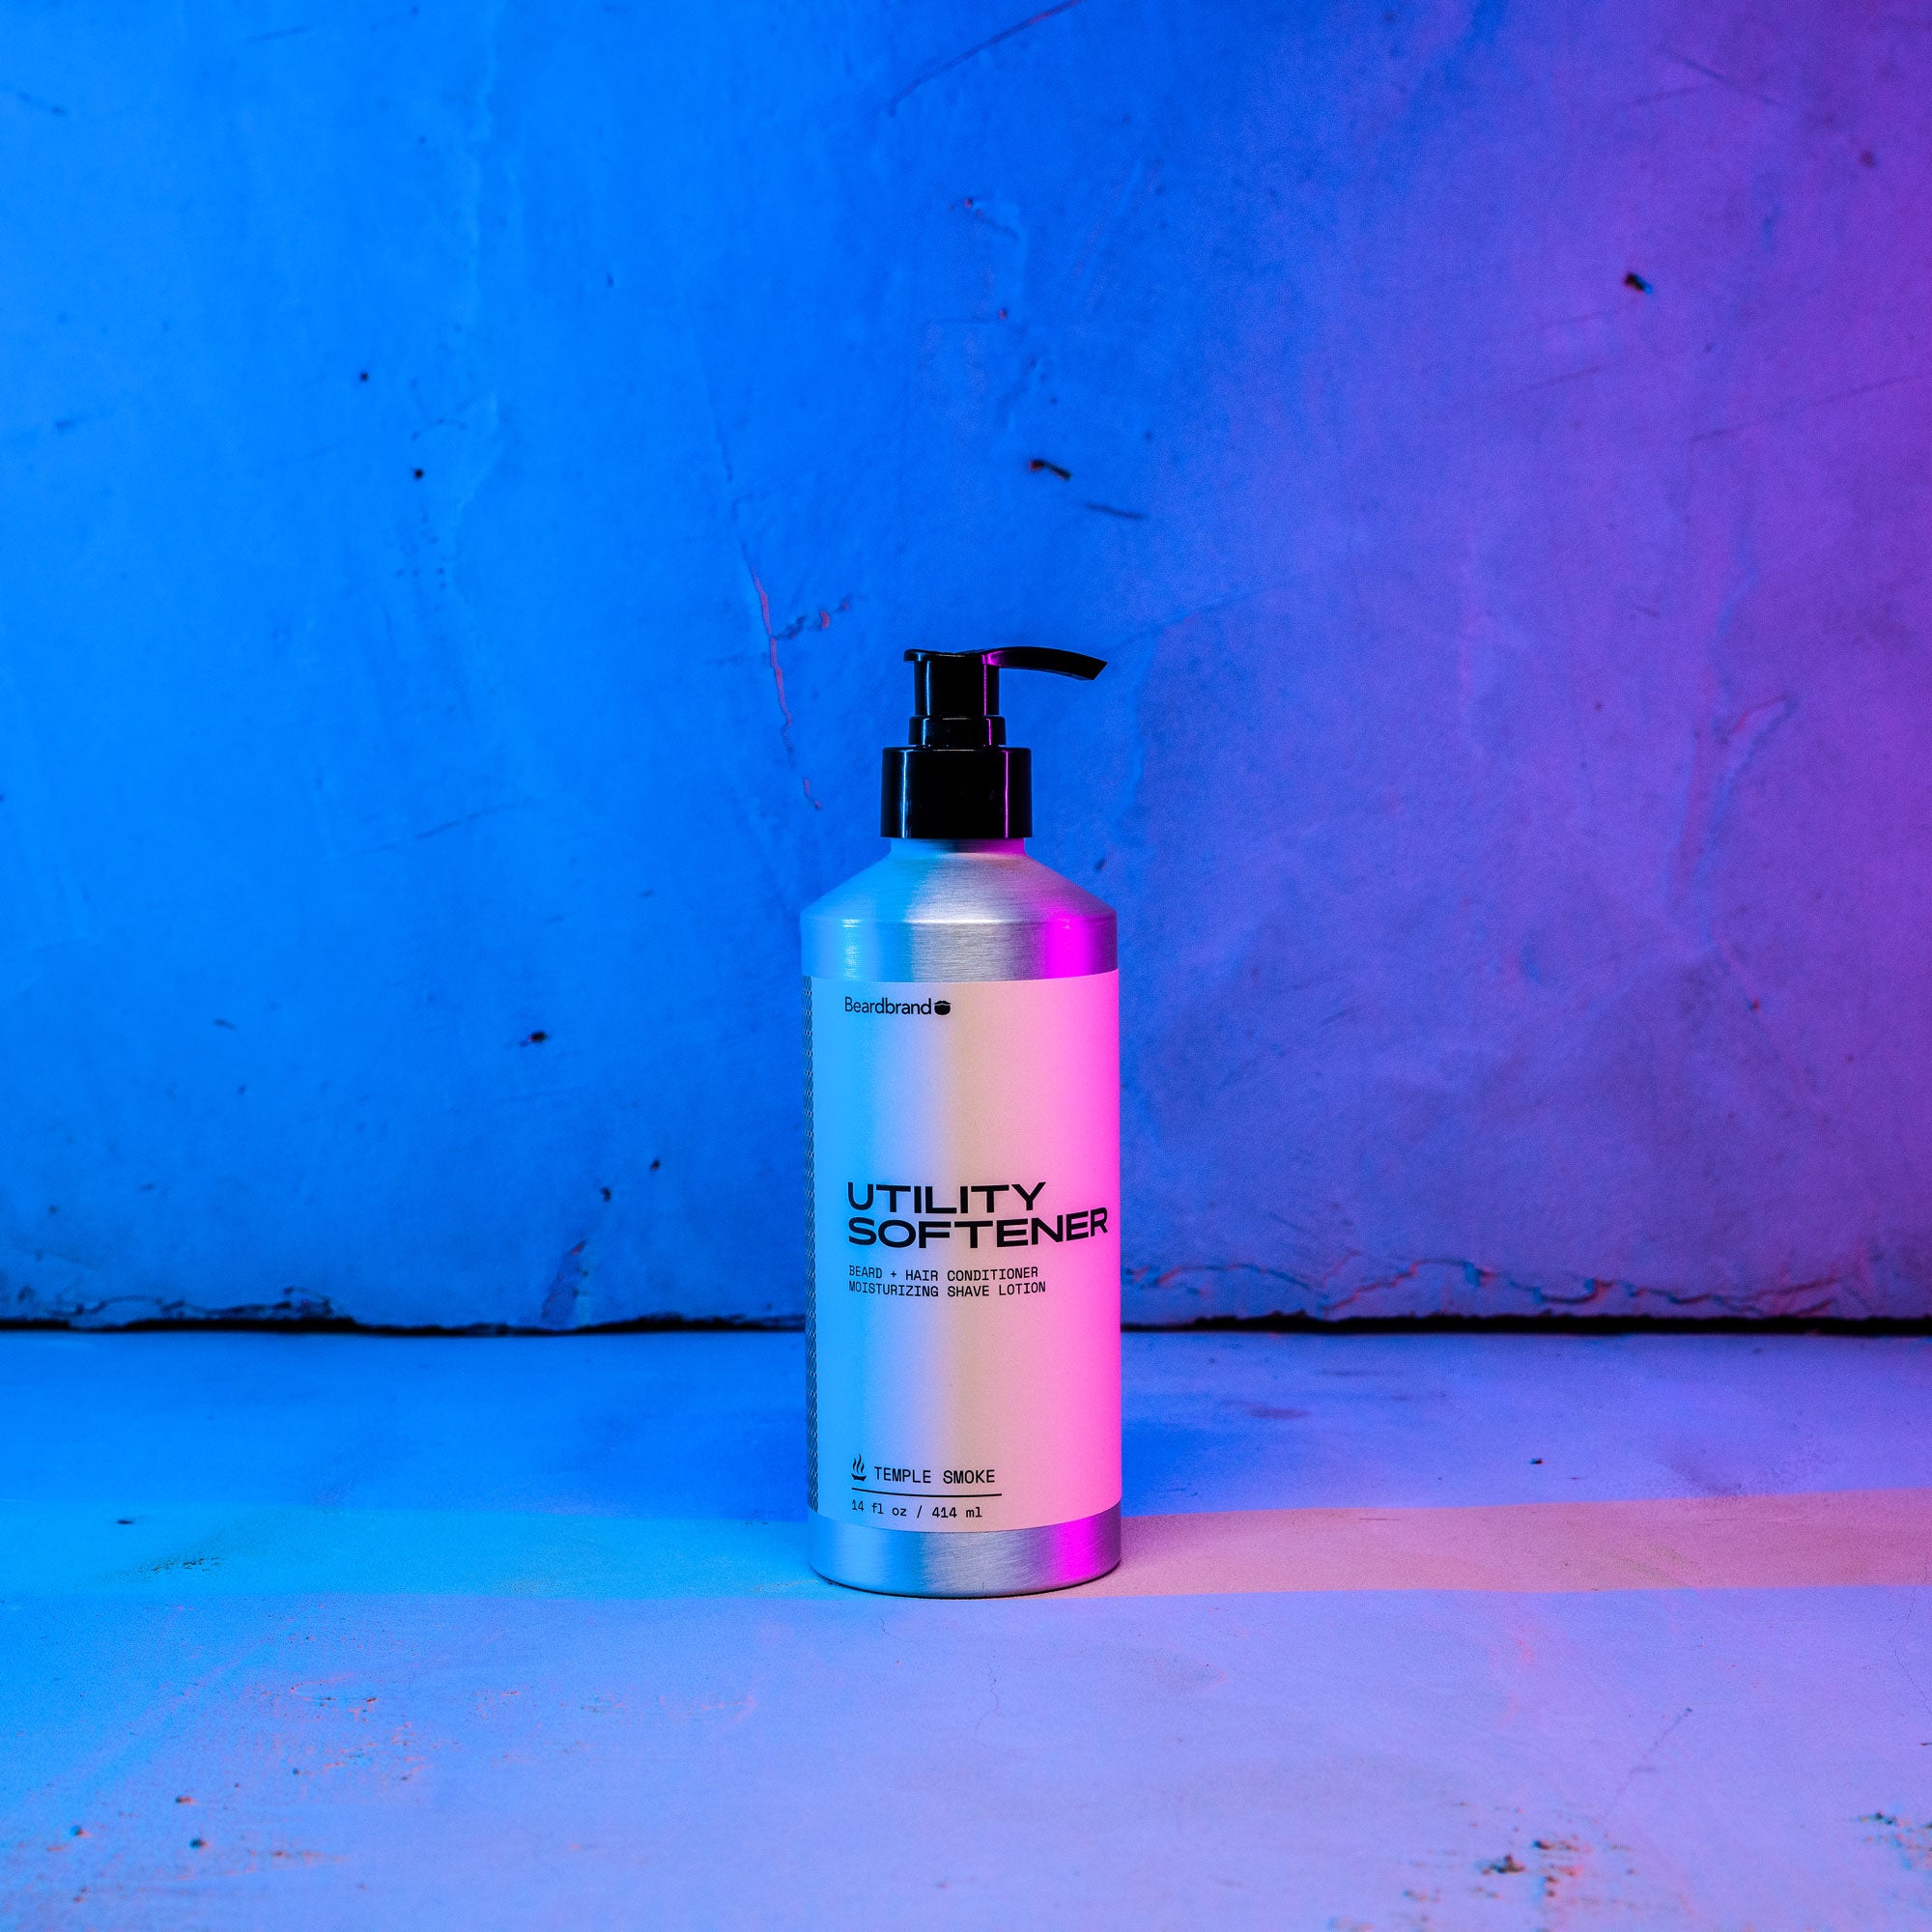 Beardbrand's Utility Softener set on a concrete backdrop highlighted in blue and pink lighting with the label facing forward.